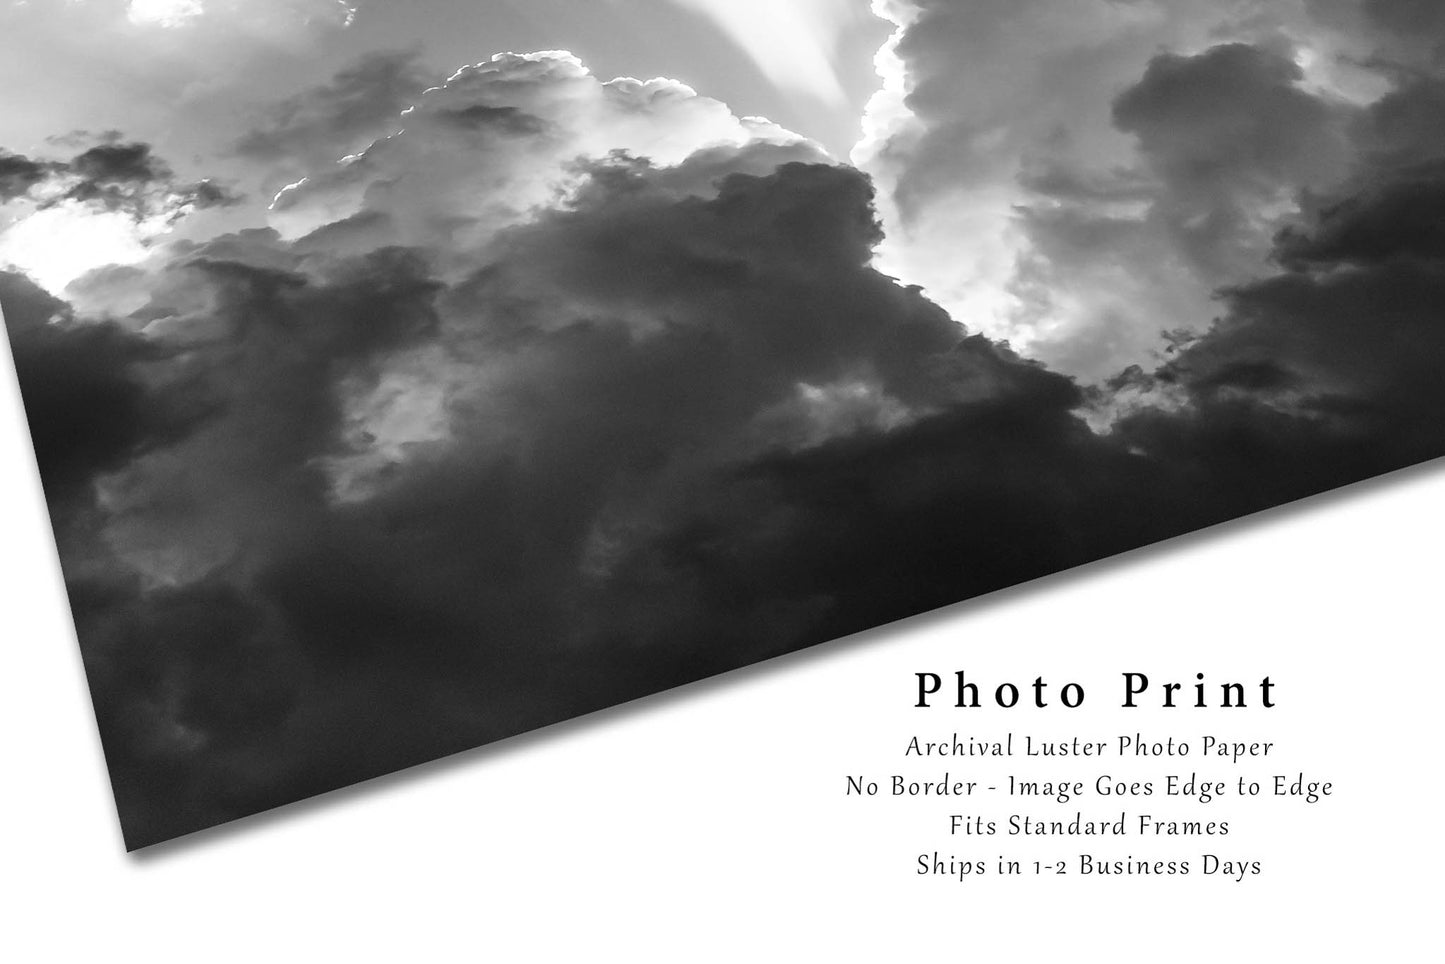 Inspirational Wall Art - Black and White Picture of Sunbeams from Storm Clouds in Oklahoma - Sky Photography Photo Print Artwork Decor